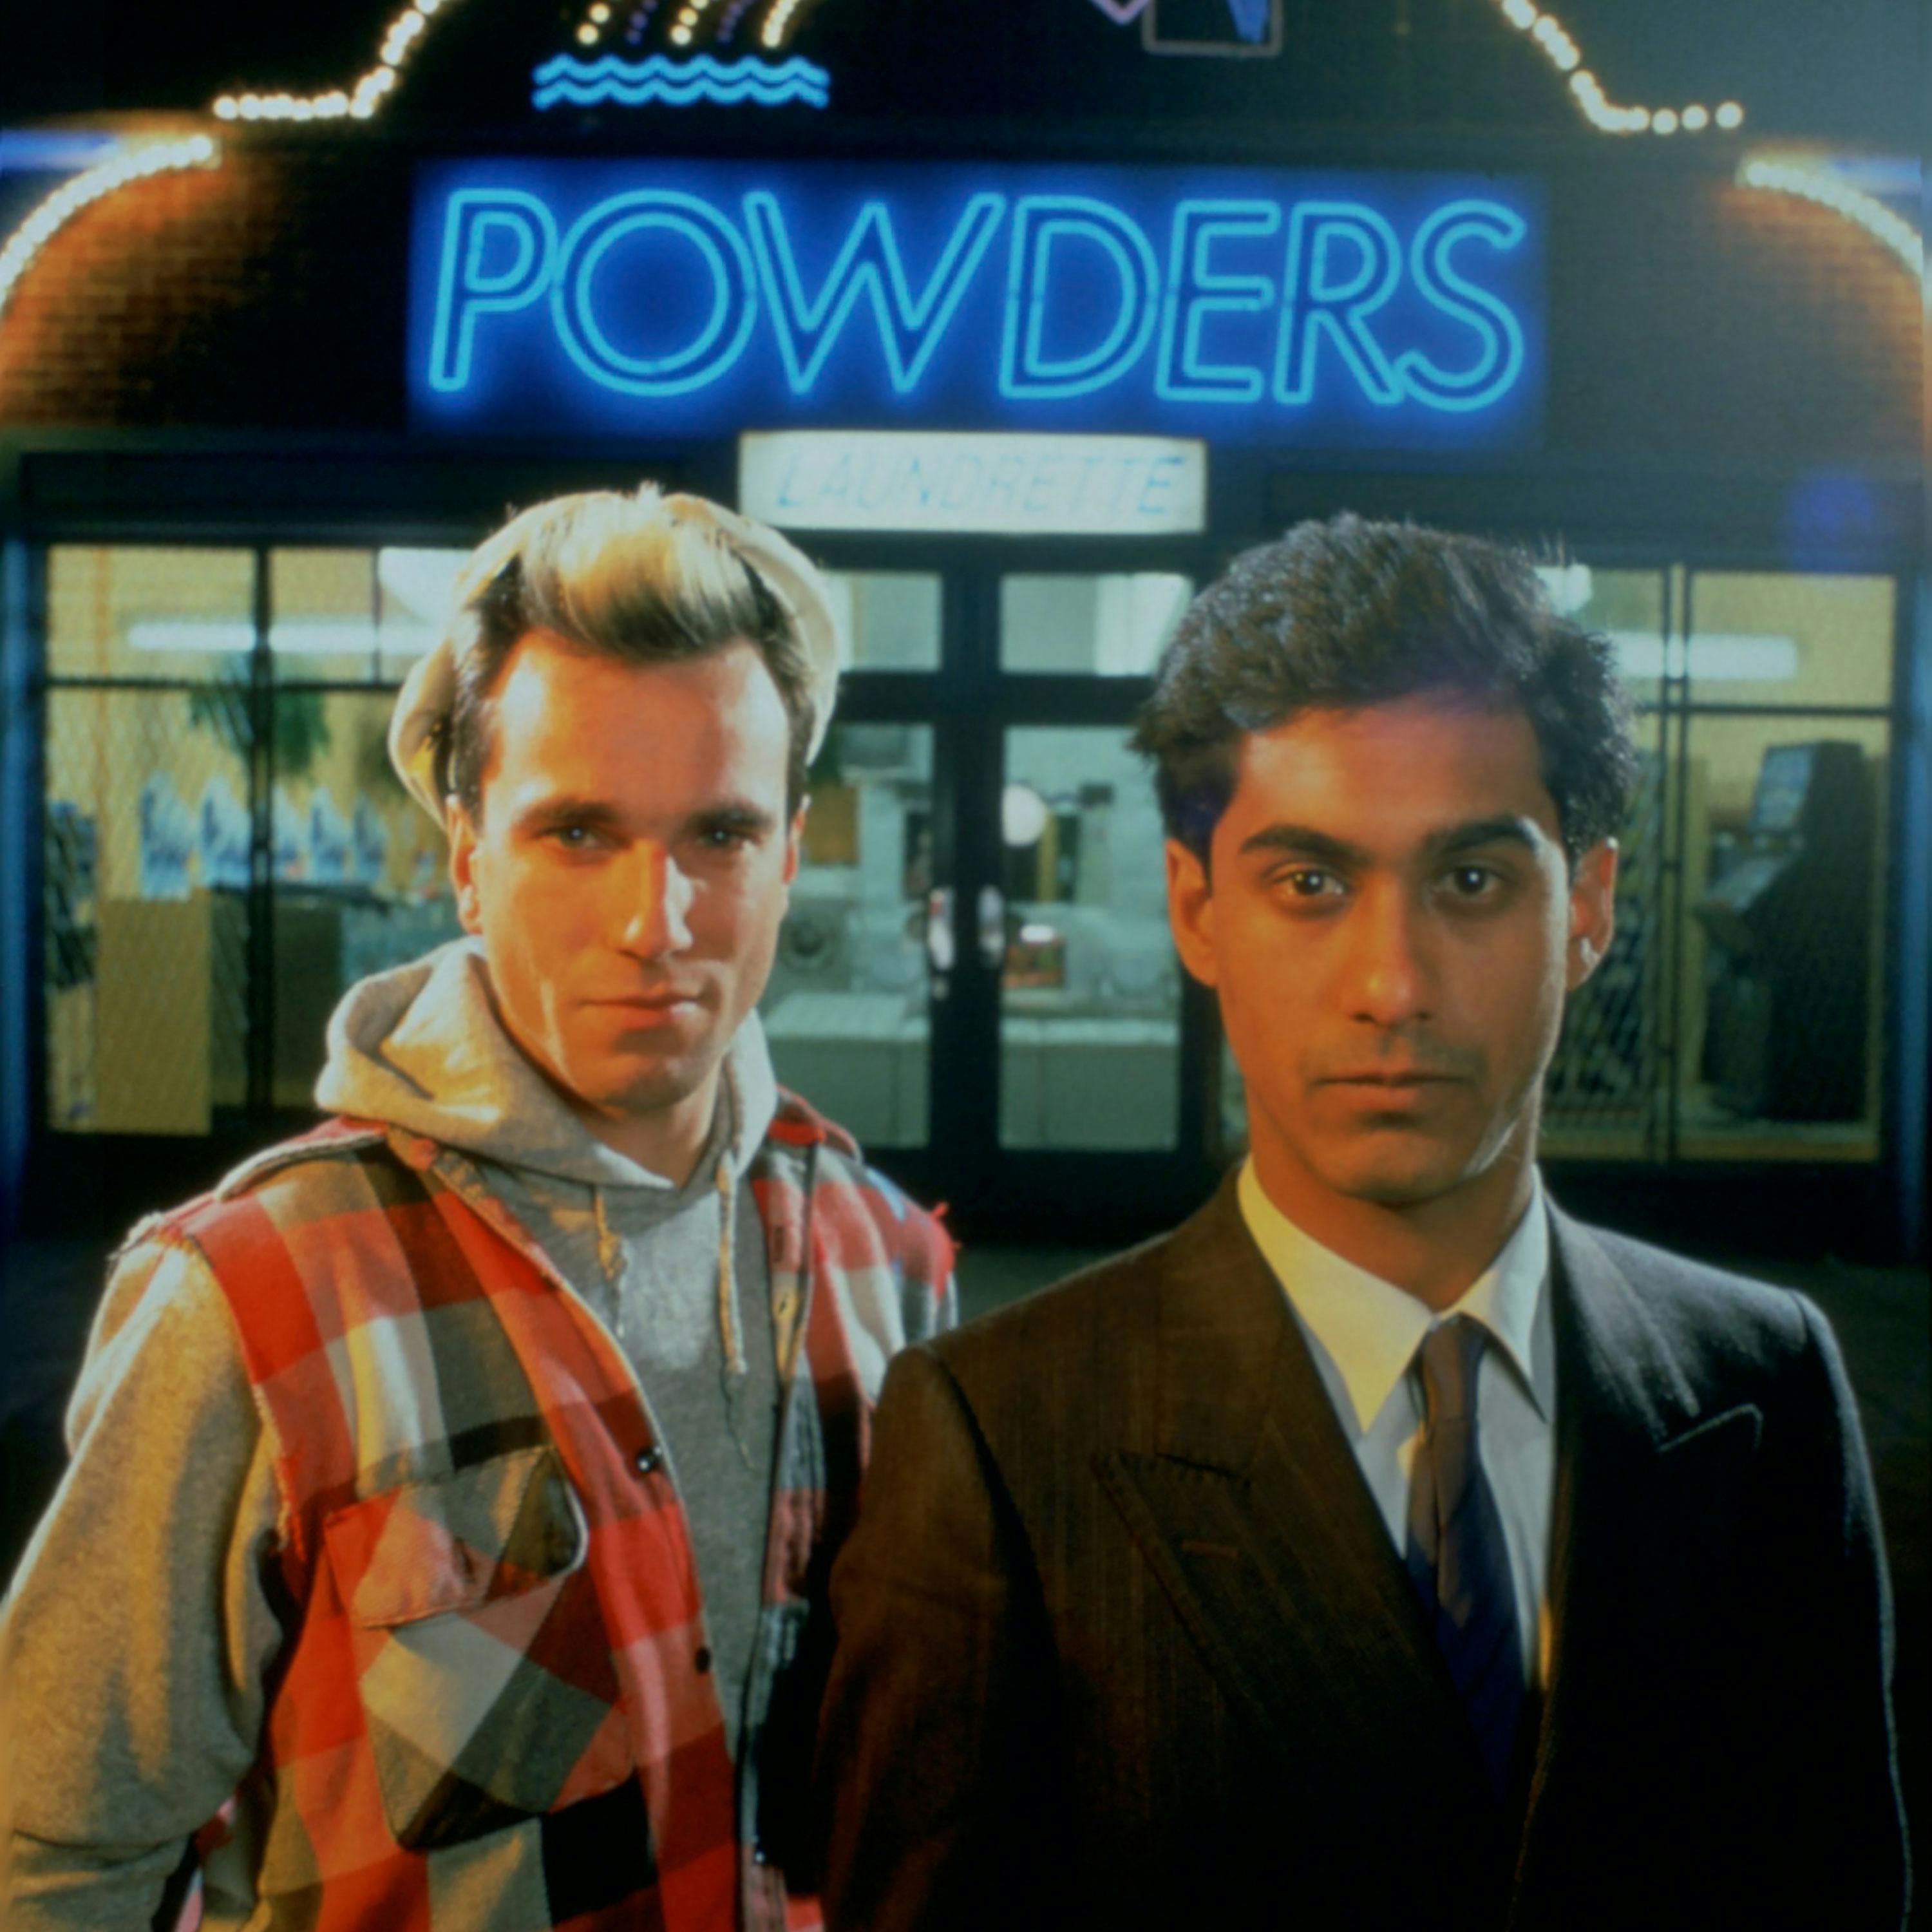 A white man wearing a grey hoodie and a flannel overshirt stands beside a south asian man in a brown suit and tie. they stand in front of. building with a neon sign that reads 'POWDERS'